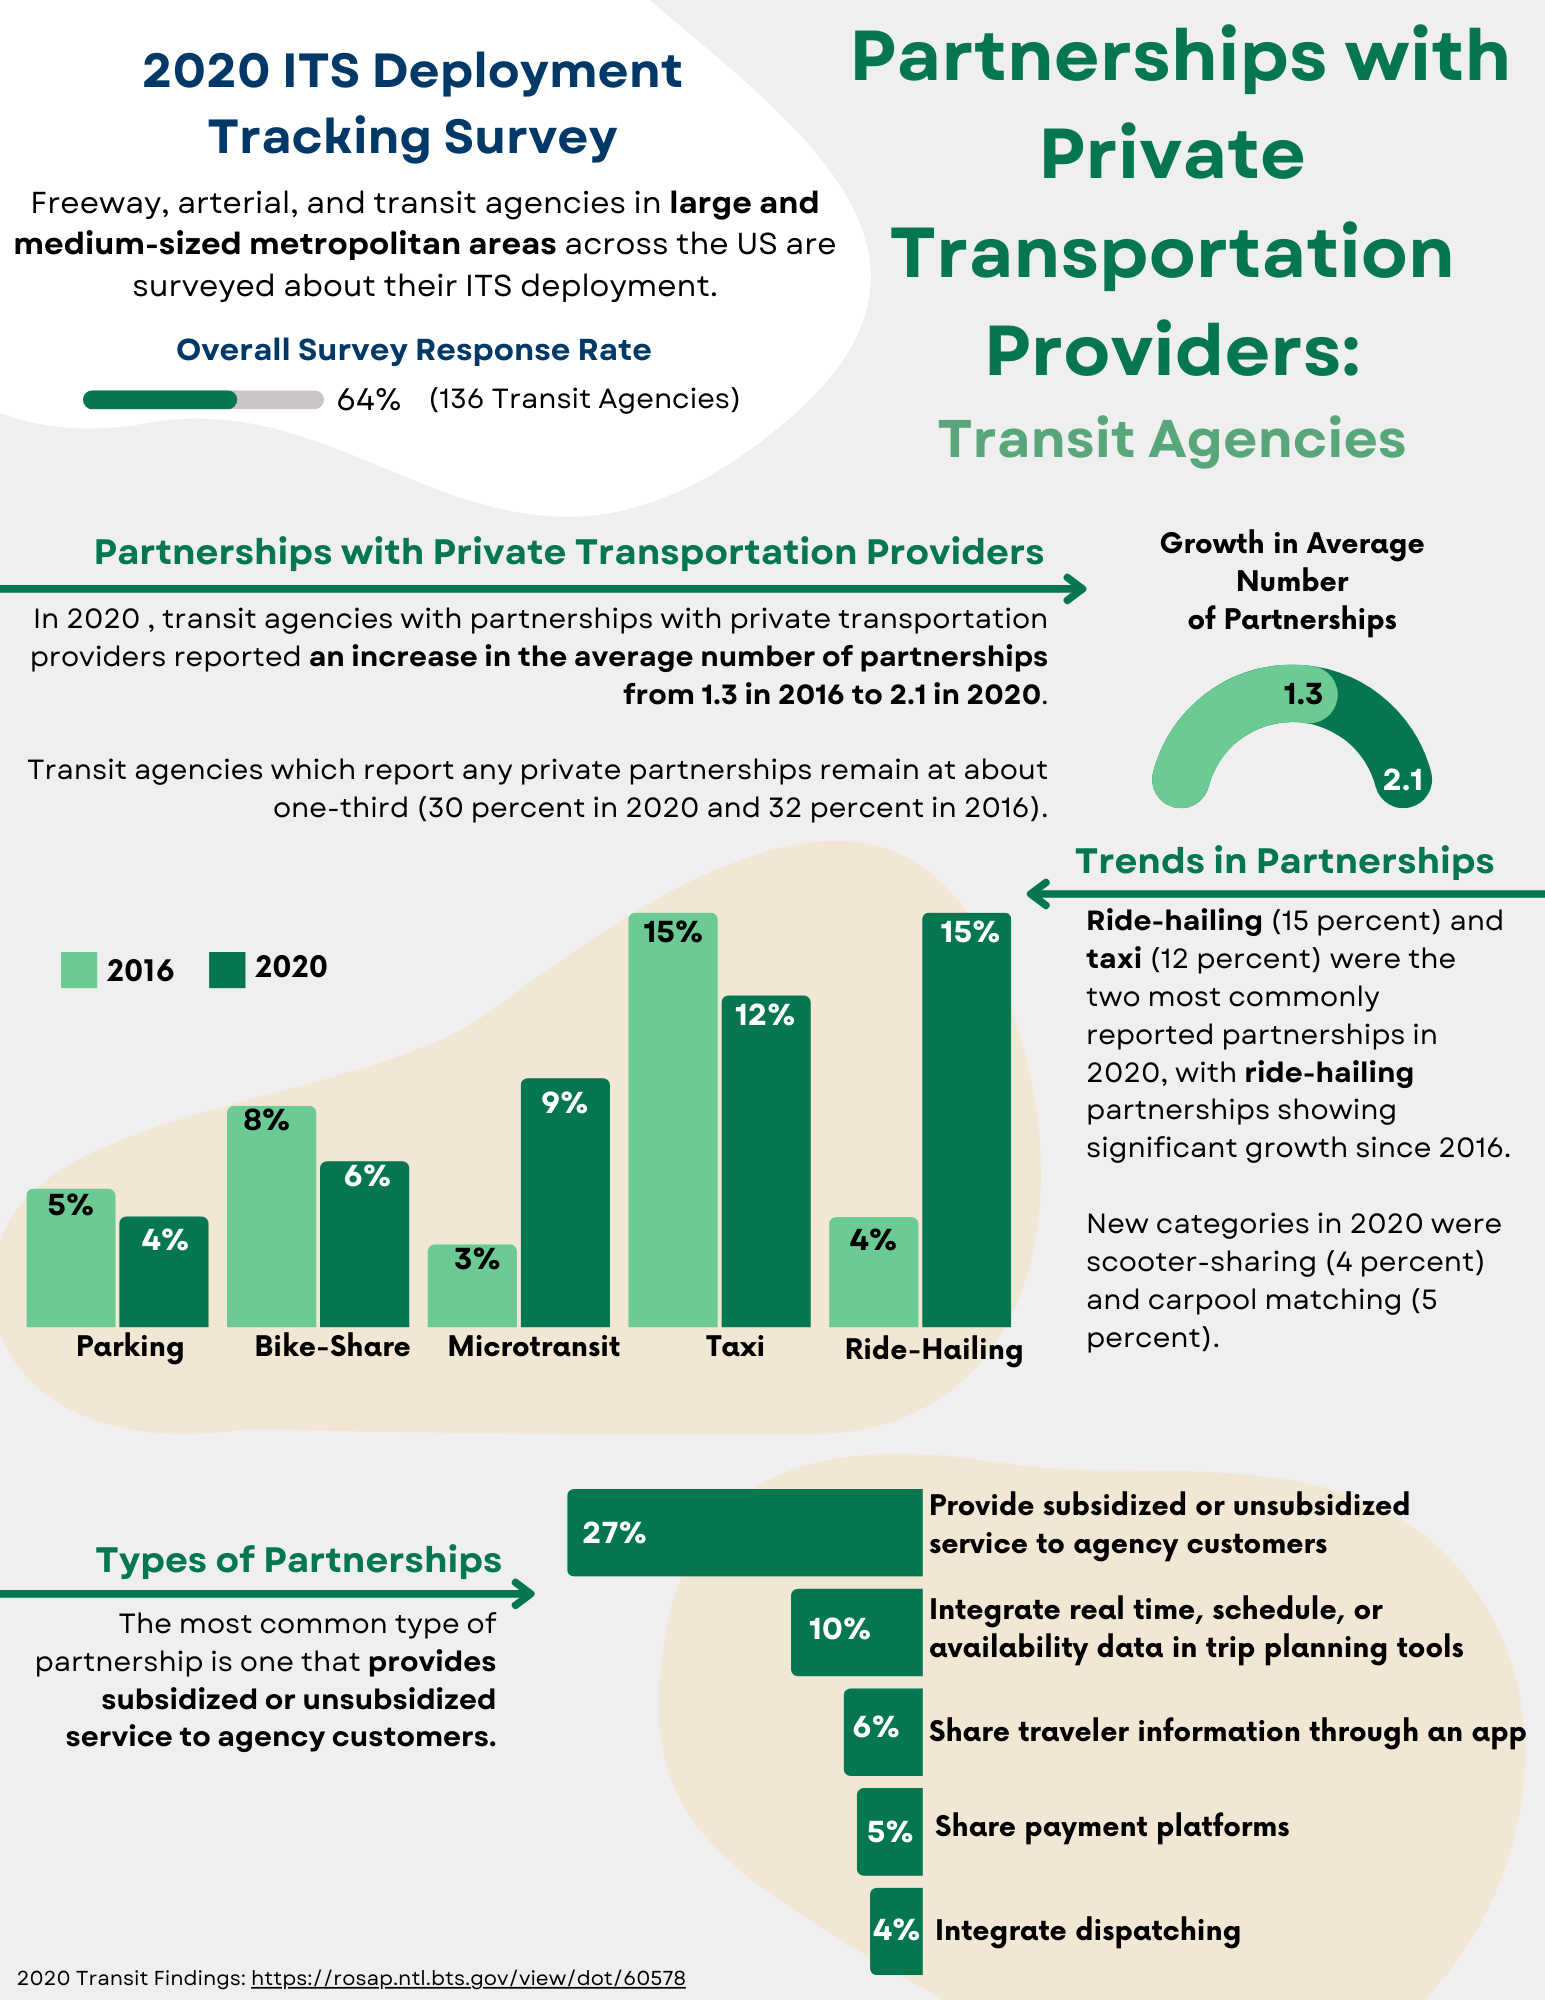 Infographic depicting partnerships with private transportation providers, with ride-hailing (15%) and taxi (12%) as the two most commonly reported partnerships. 